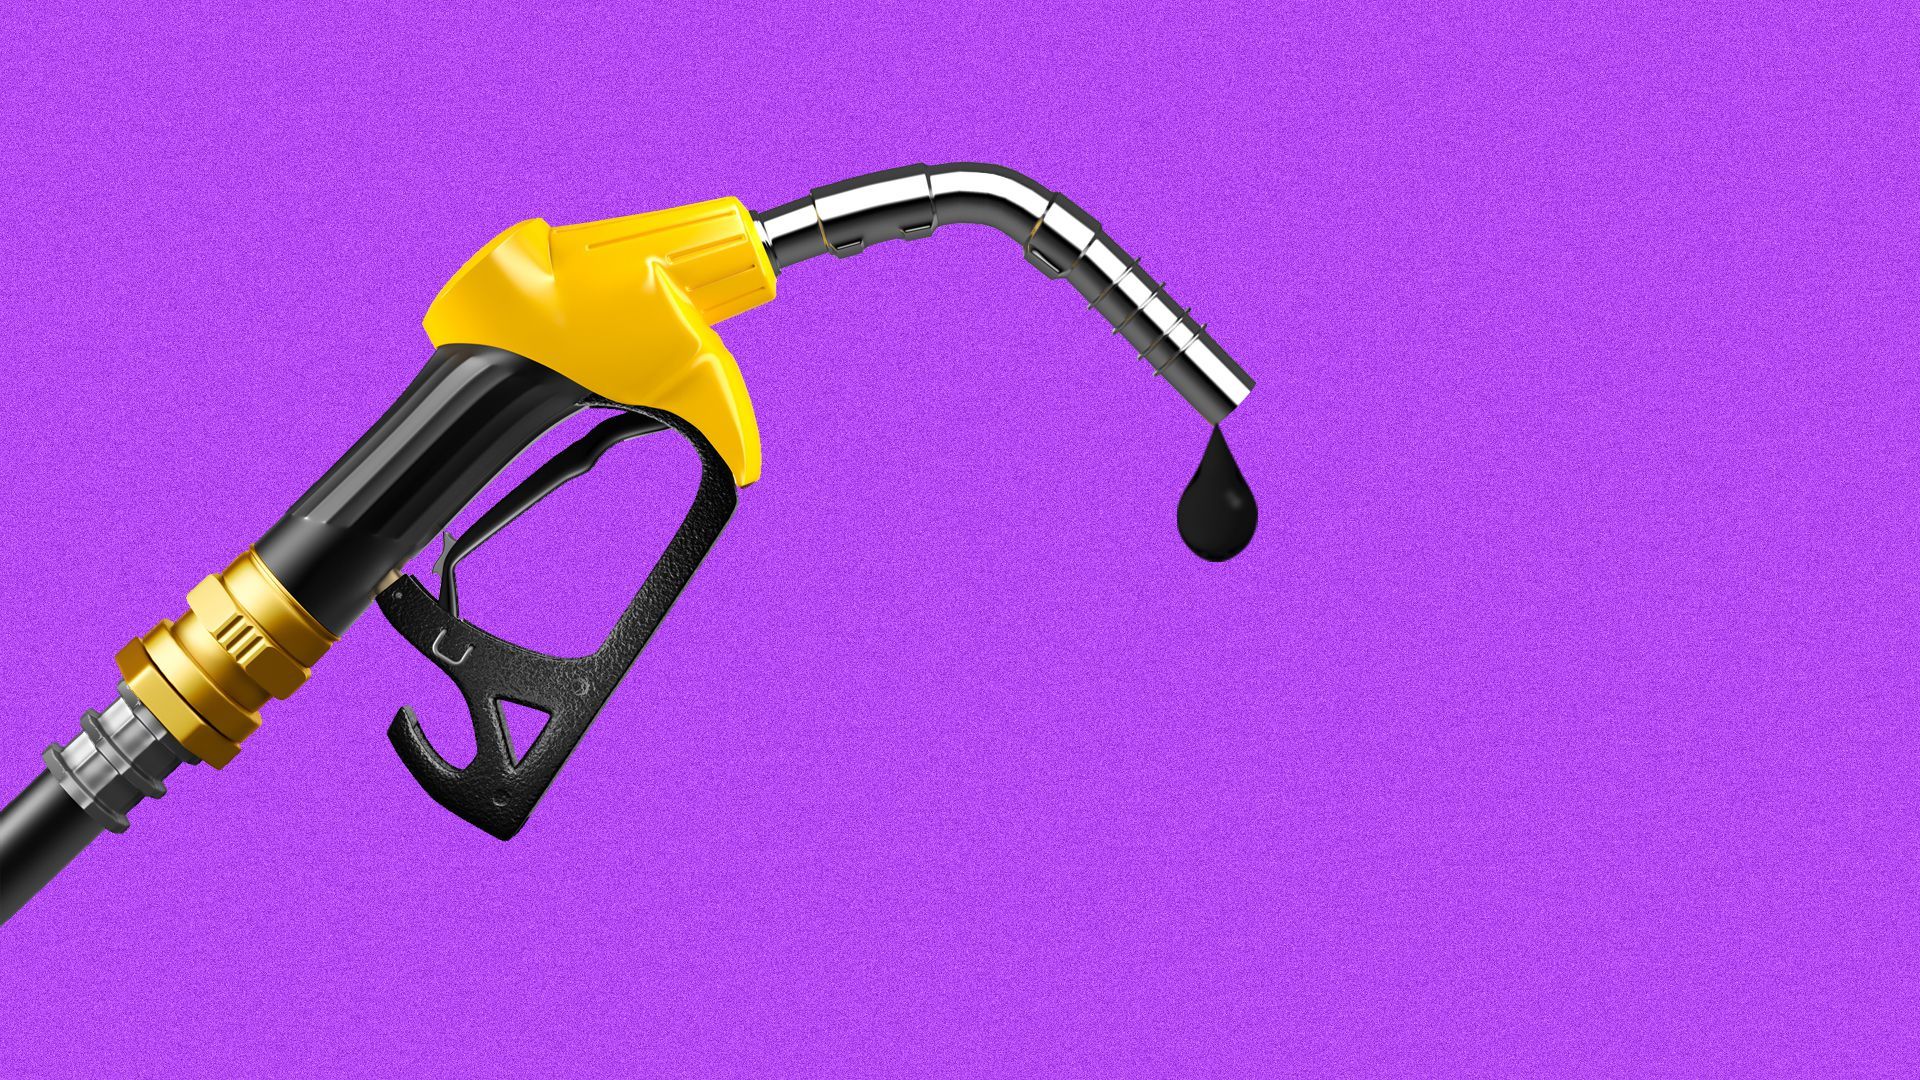 Gas nozzle dripping.